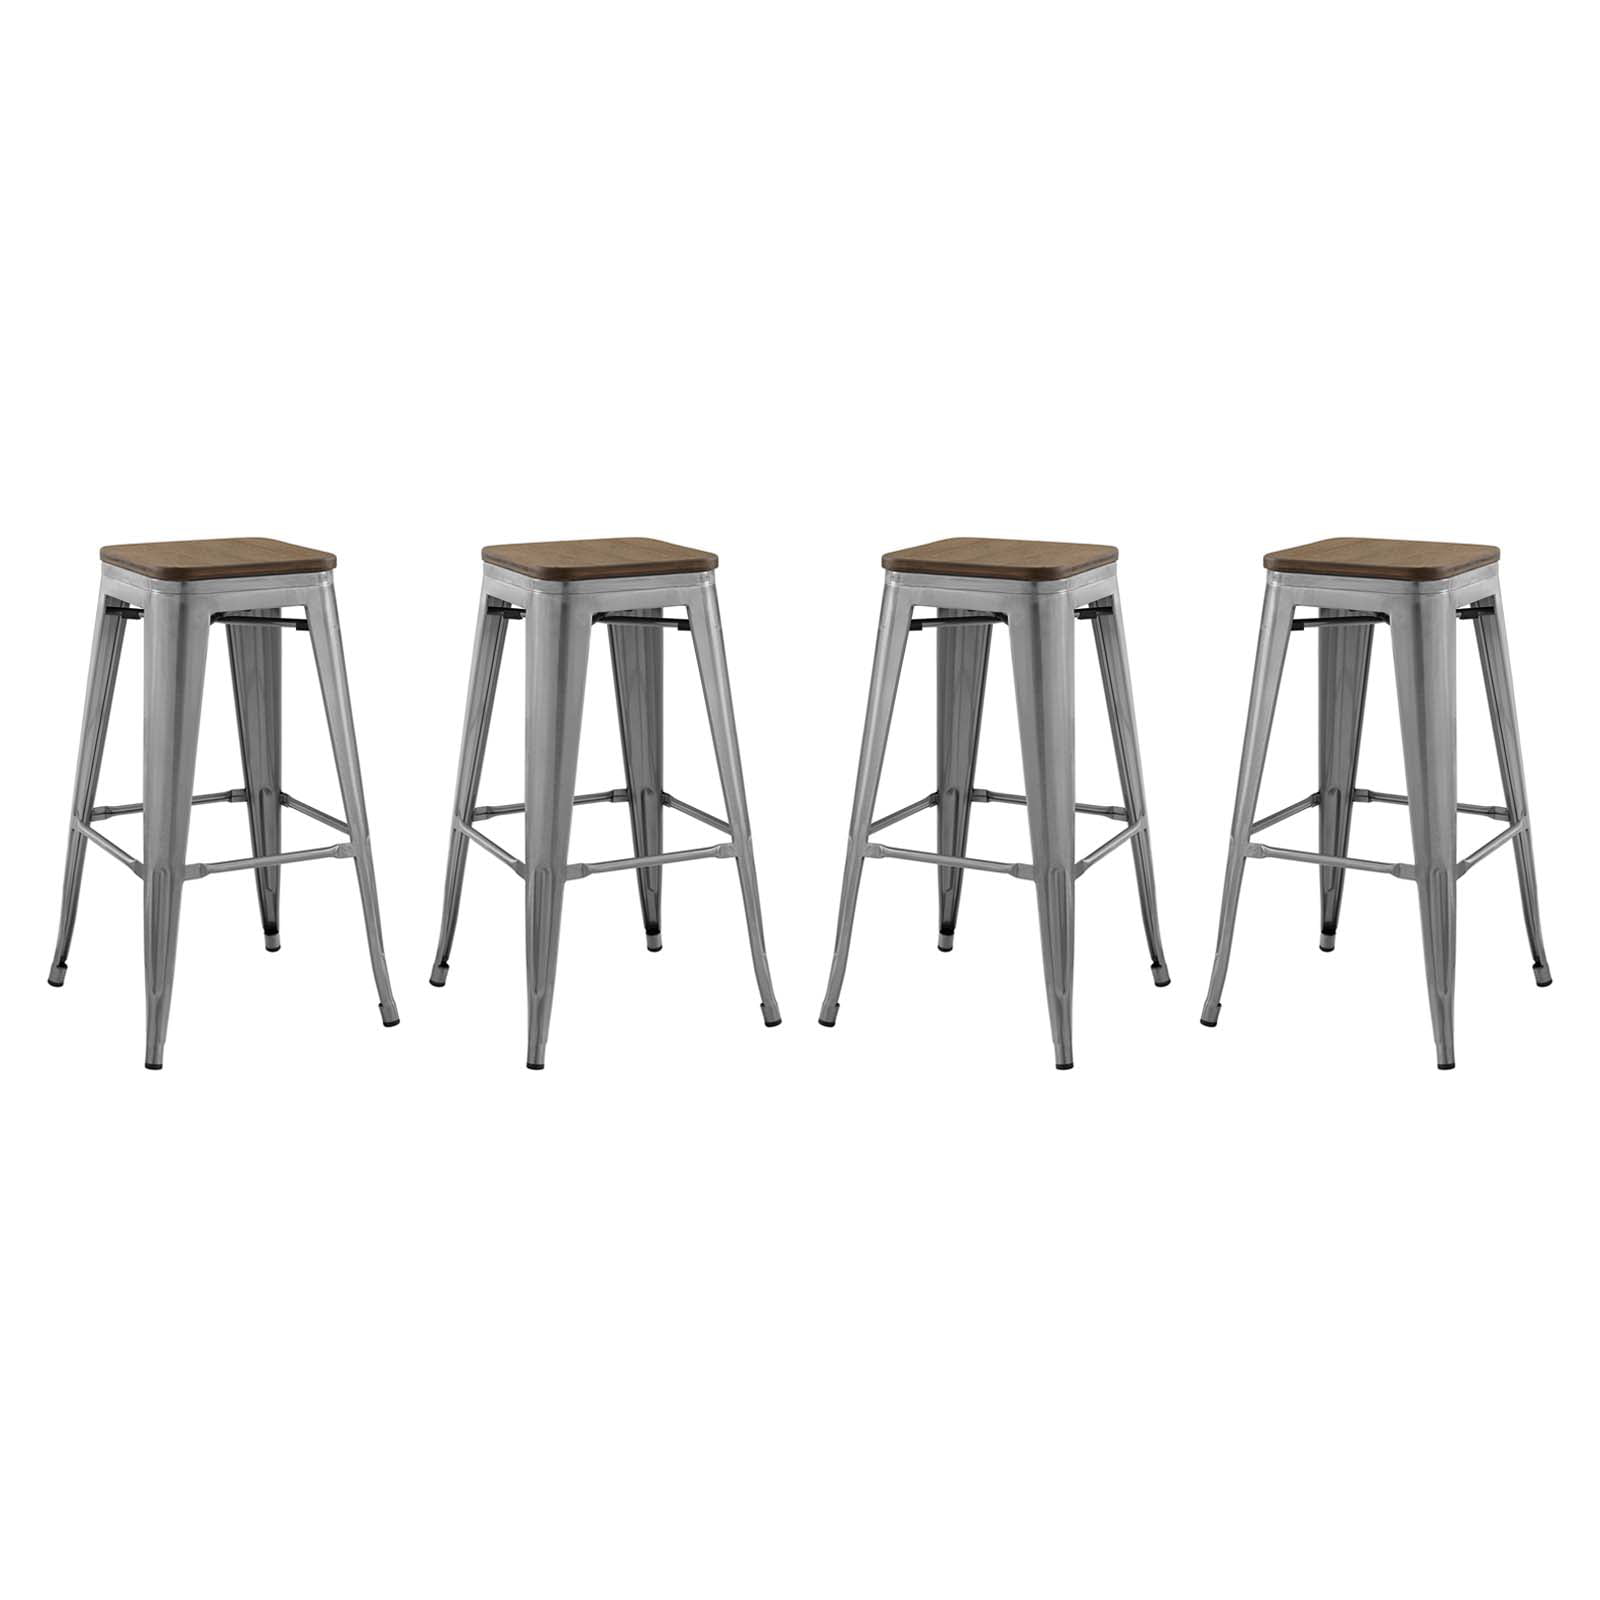 Set of 4 Metal Bar Stools Counter Pub Shop Kitchen Dining Chairs Heavy-Duty Z1F3 